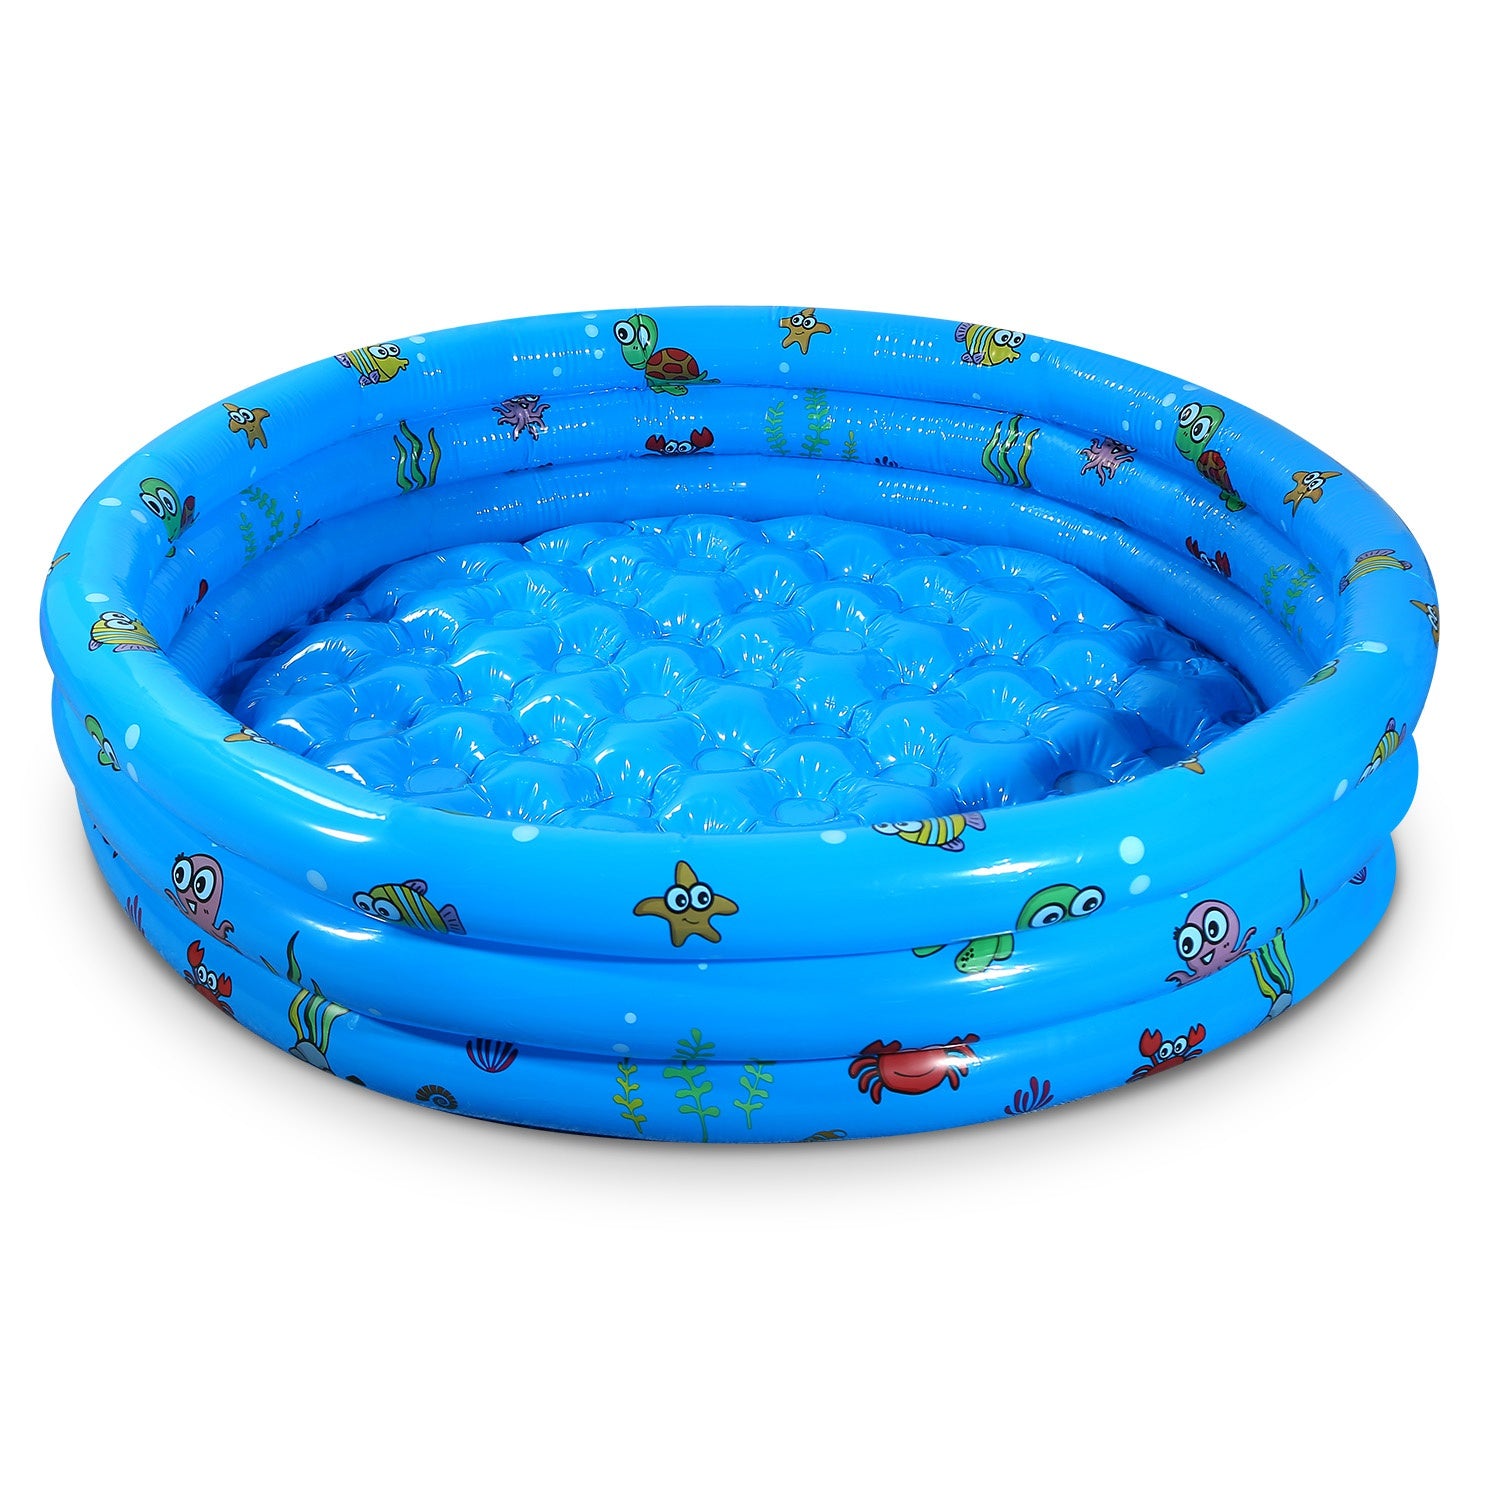 title:51x13” Inflatable Swimming Pool Blow Up Family Pool For 3 Kids Foldable Swim Ball Pool Center w/ 4 Valves Bottom Water Drain Plug For Indoor Backyard;color:Multi